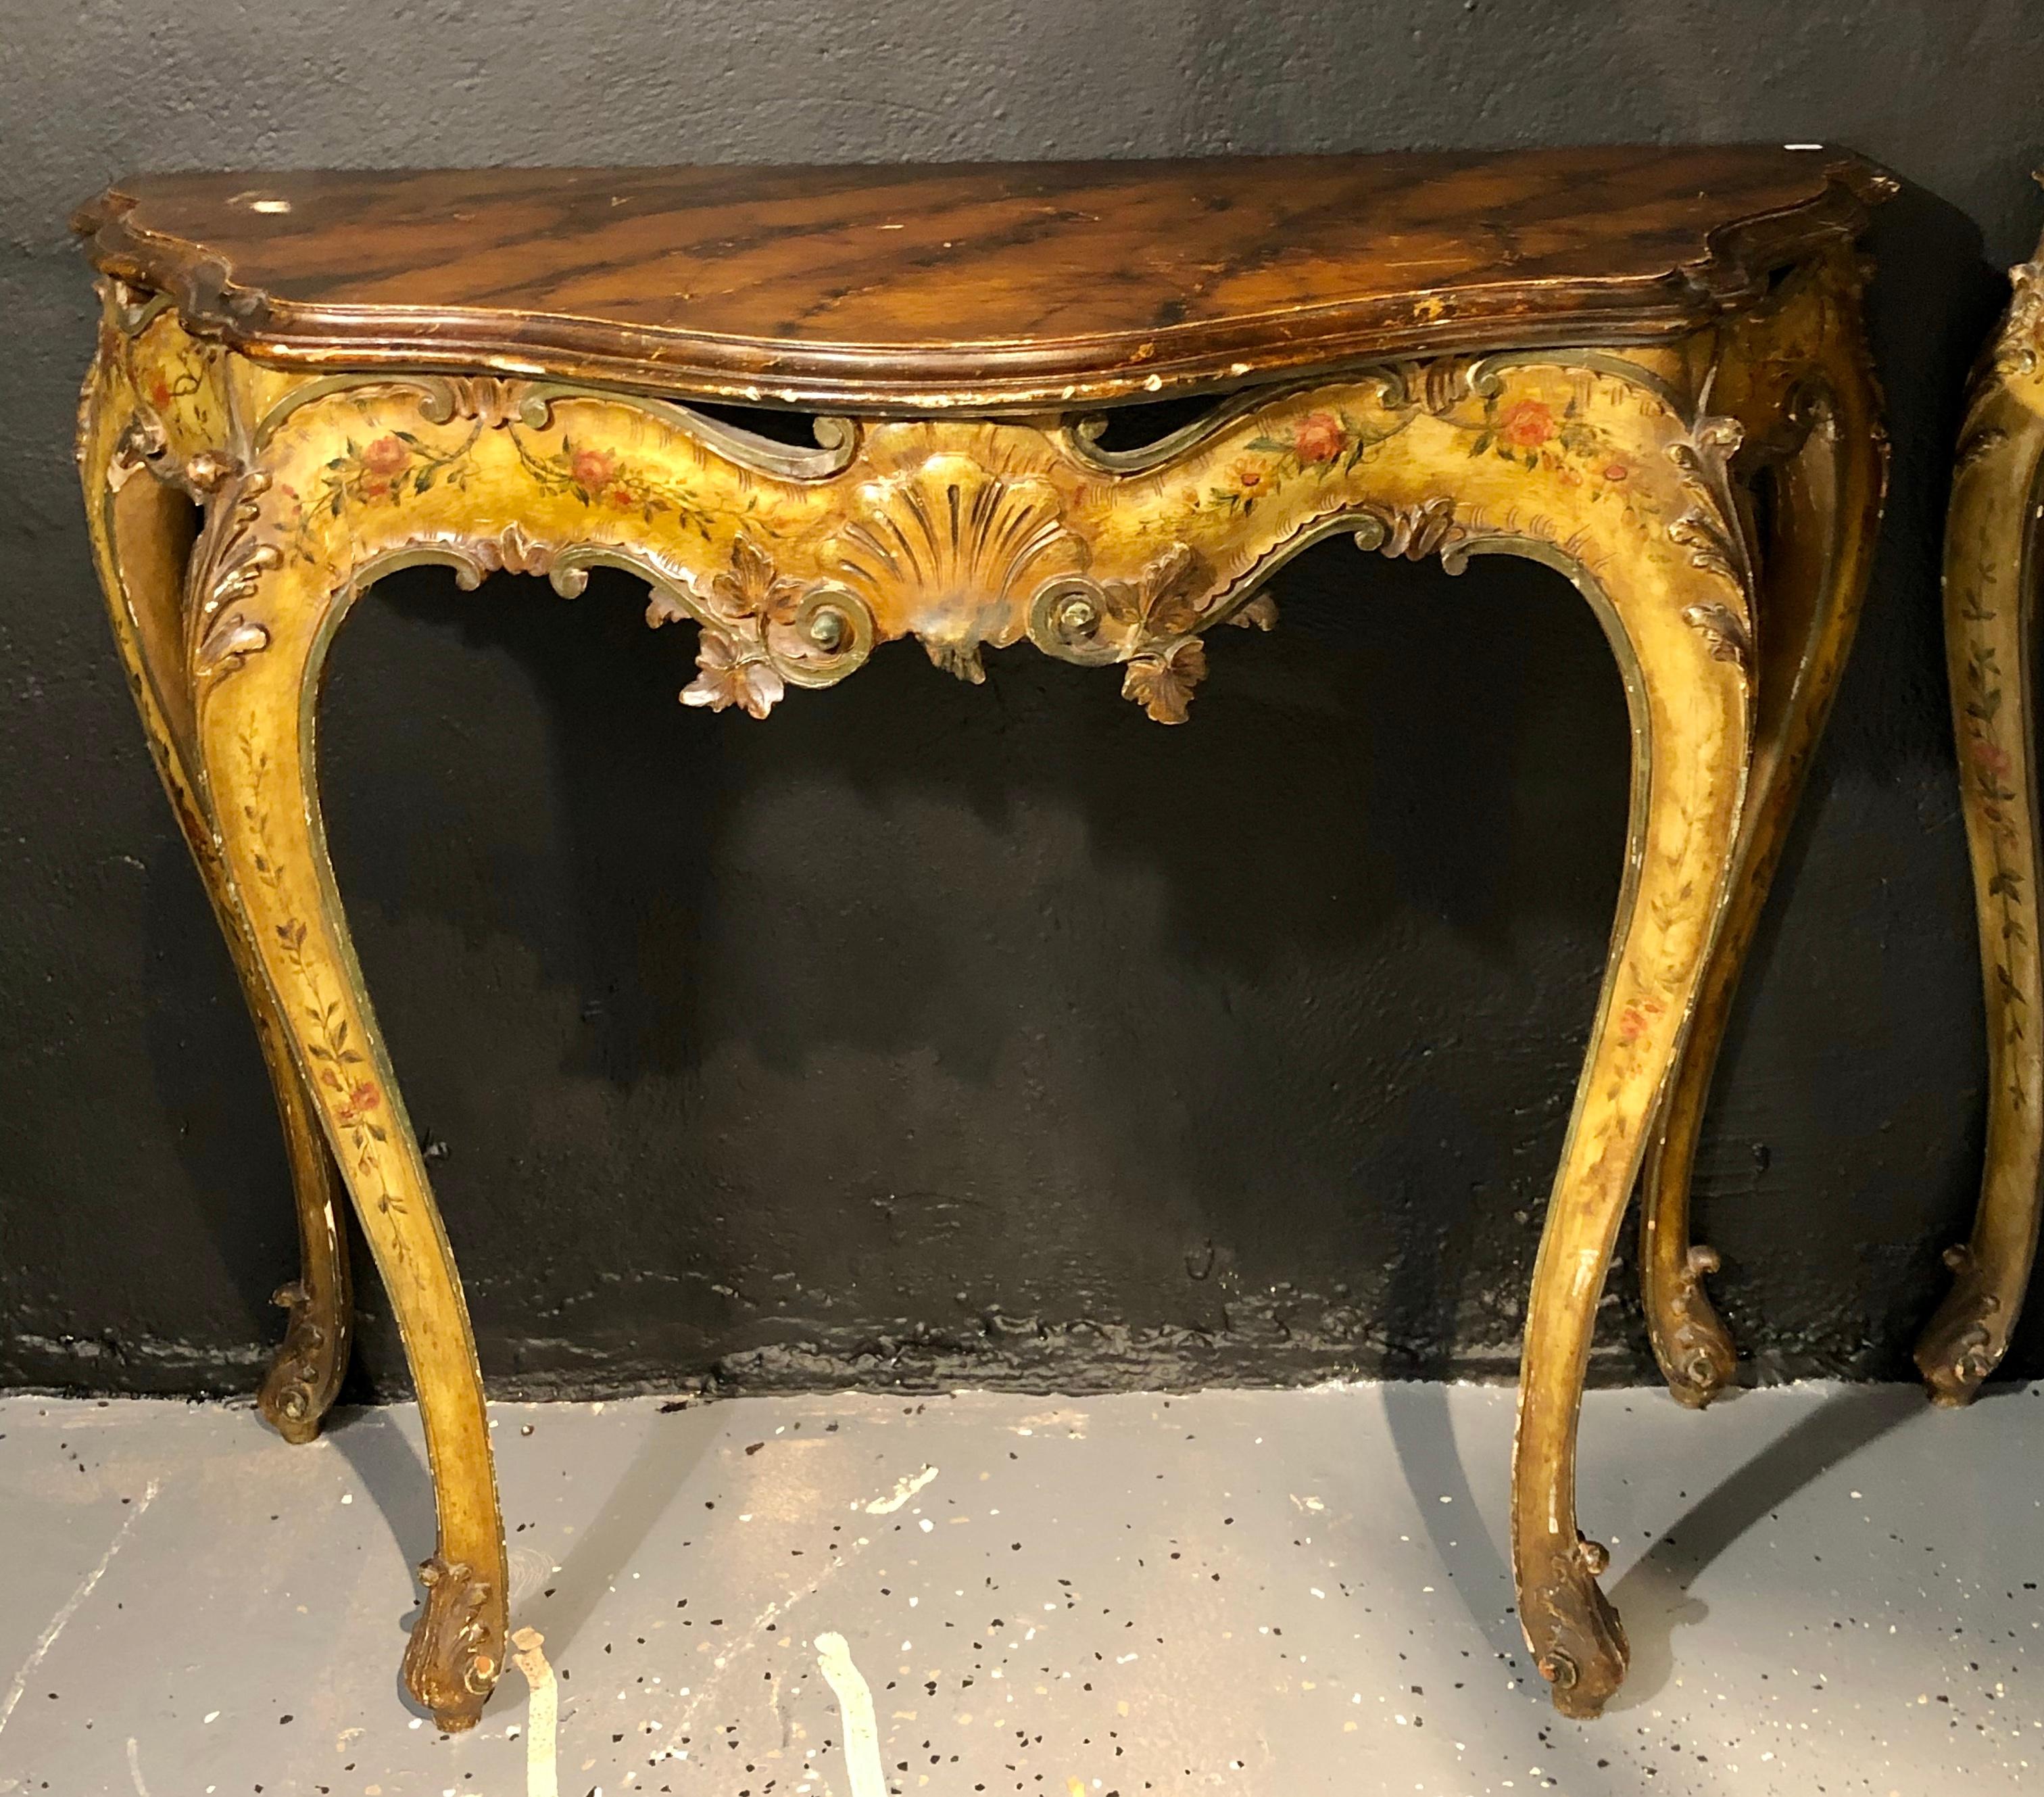 Pair of console table Italian paint decorated bases on faux marble top. This stunning pair of late 19th-early 20th century console tables have serpentine form in the Louis XV style with floral painted shell carved bases supported a fine faux marble